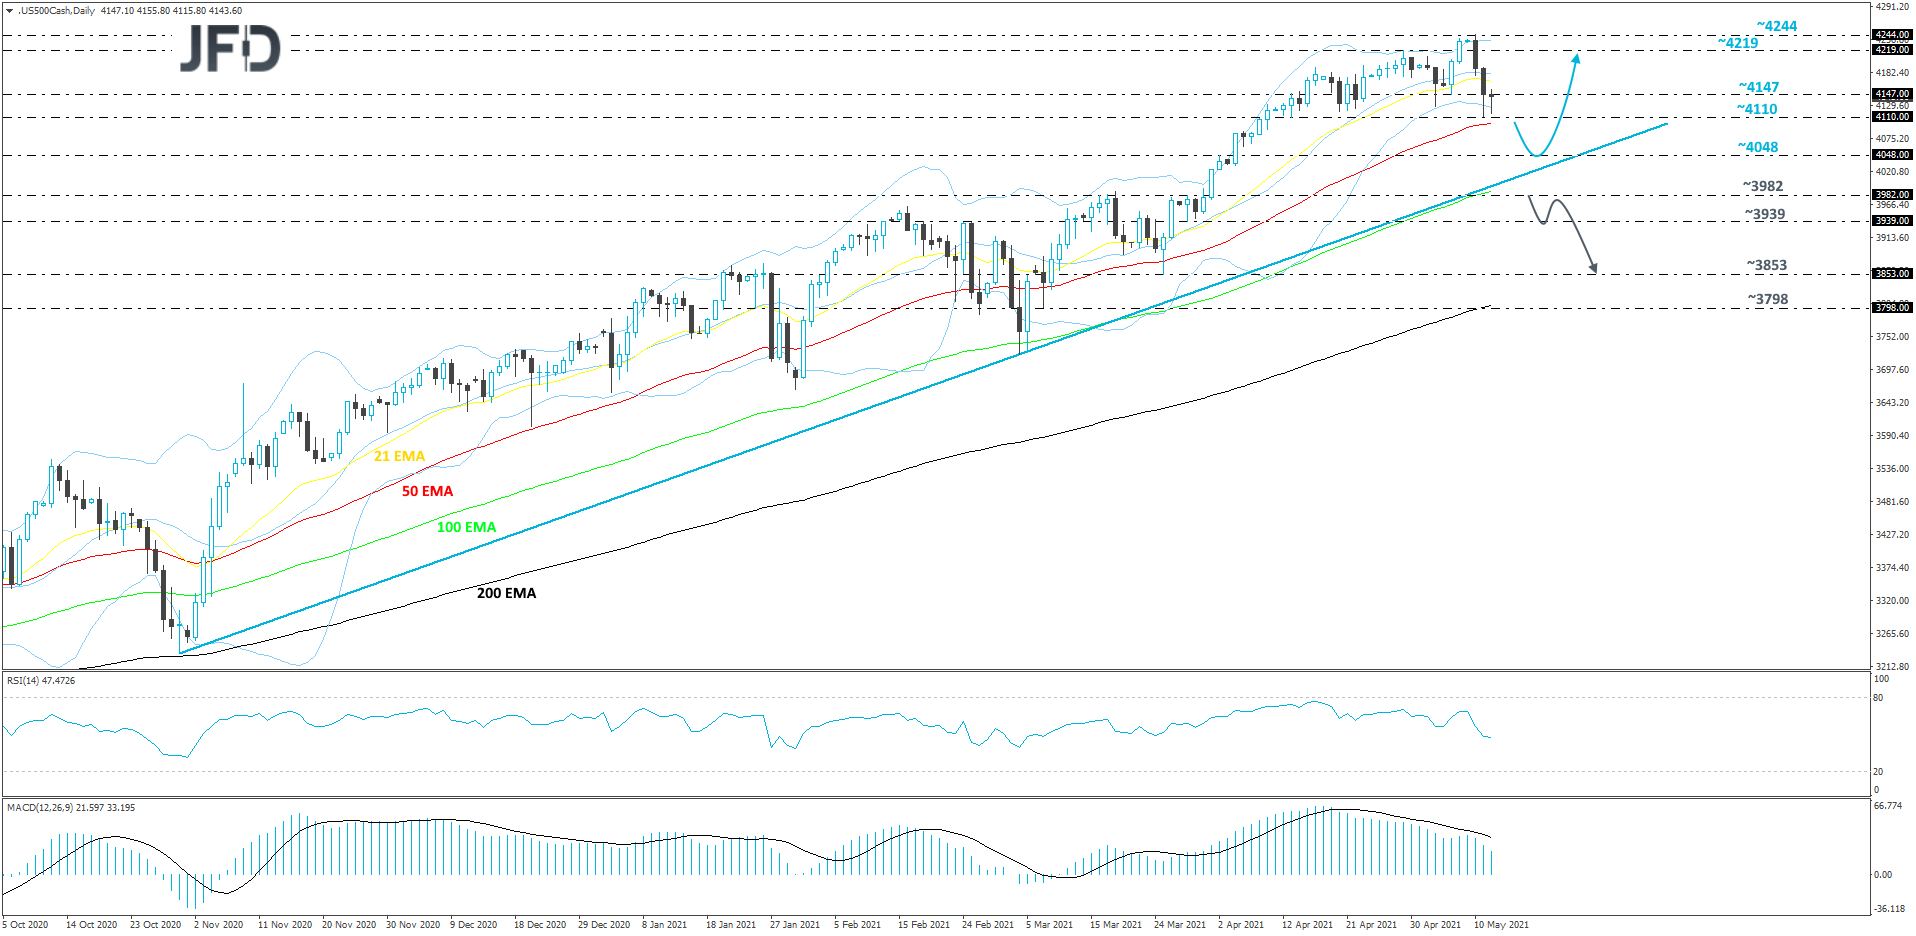 S&P 500 daily chart technical analysis